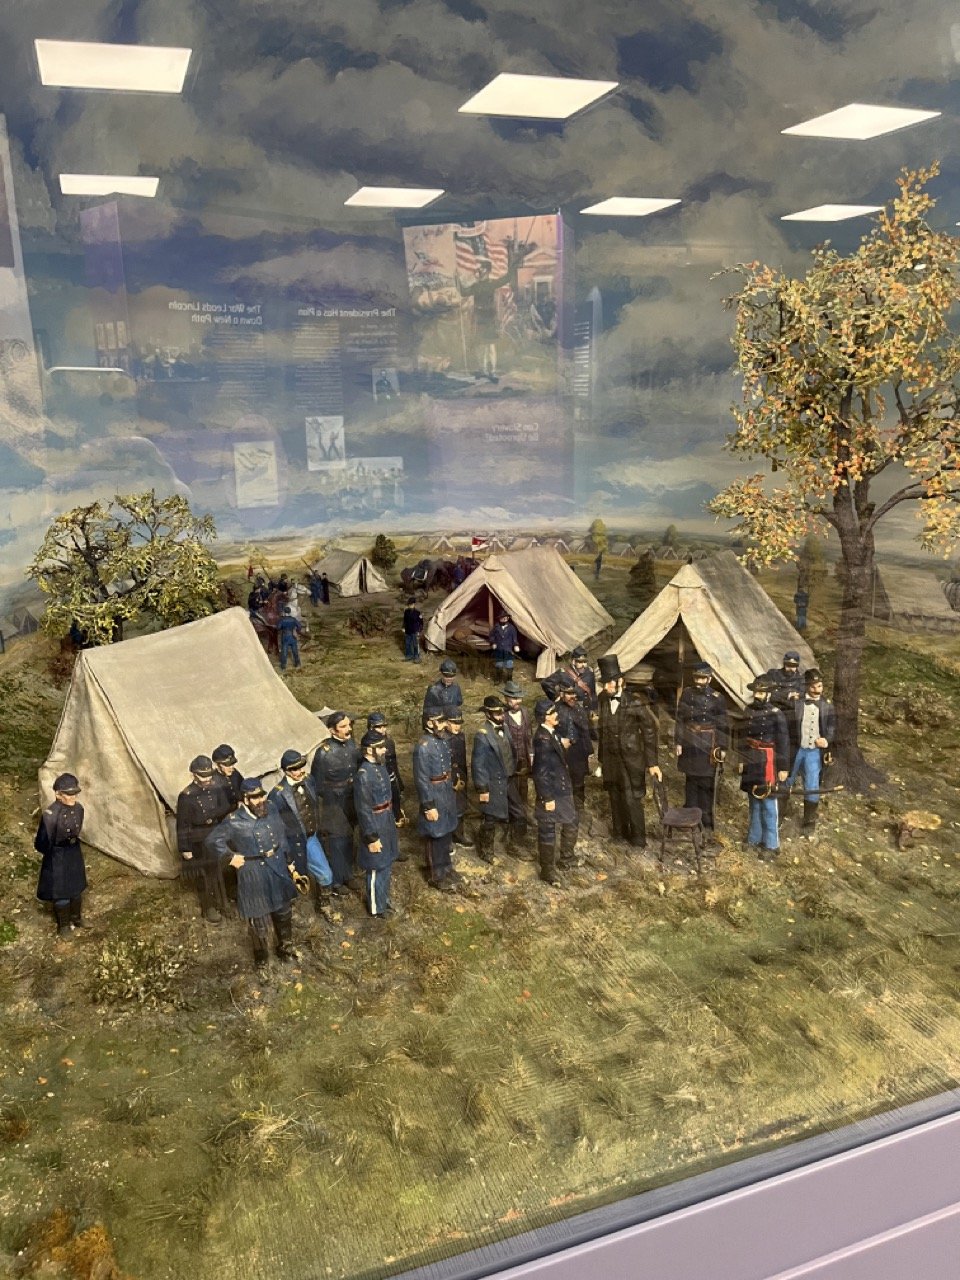 I thought this scene depicting Lincoln's visit to Antietam was cool.